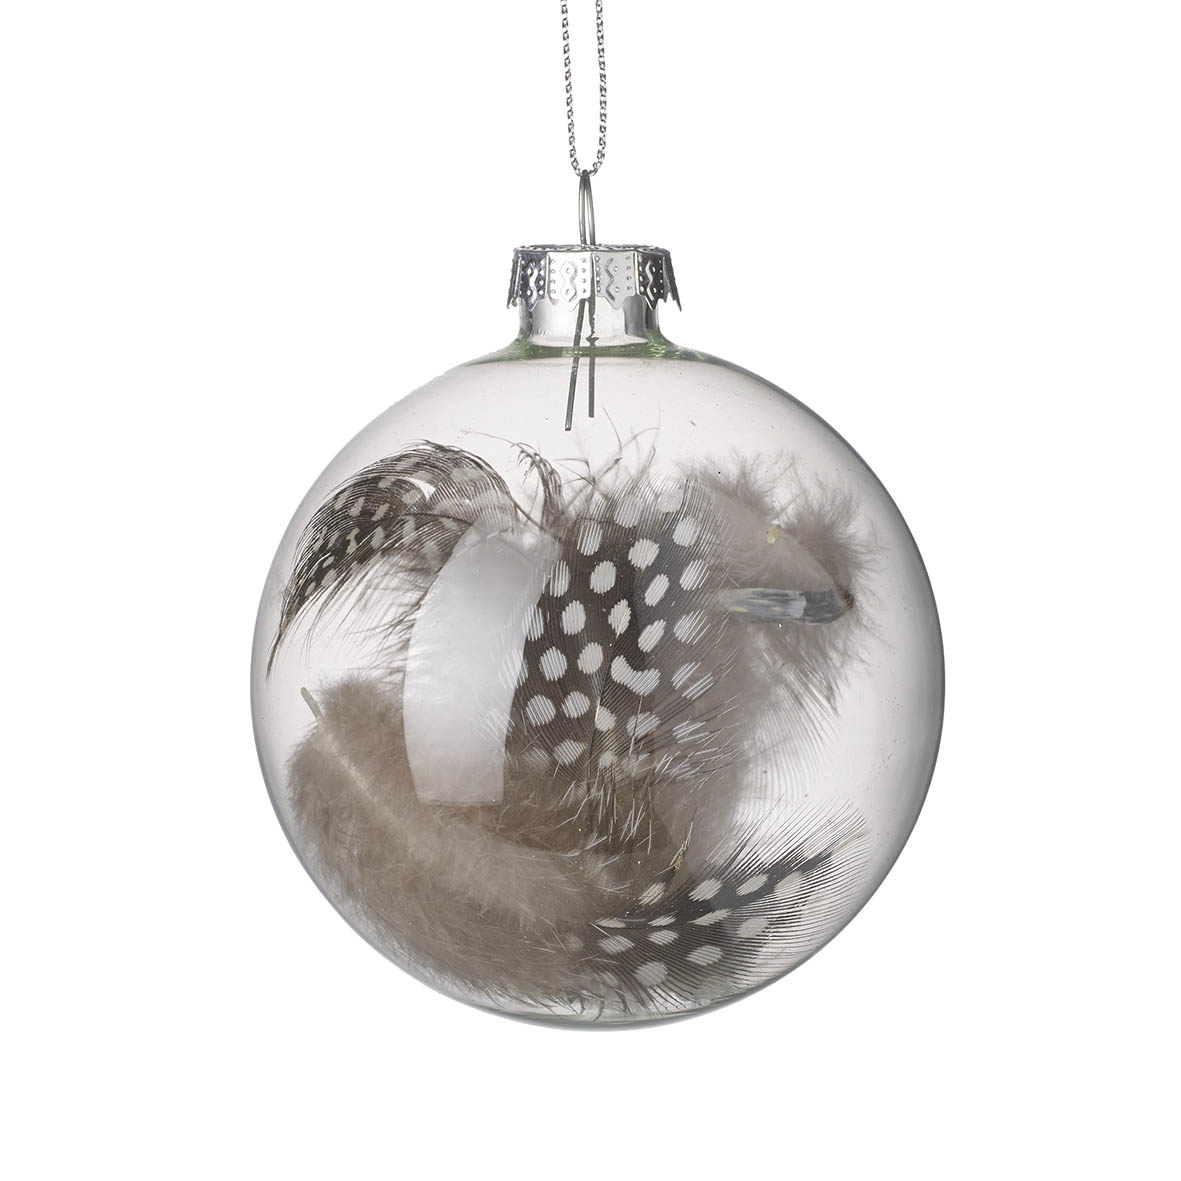 Bauble Ø8x8 cm SPOTTED FEATHER FILLED glass